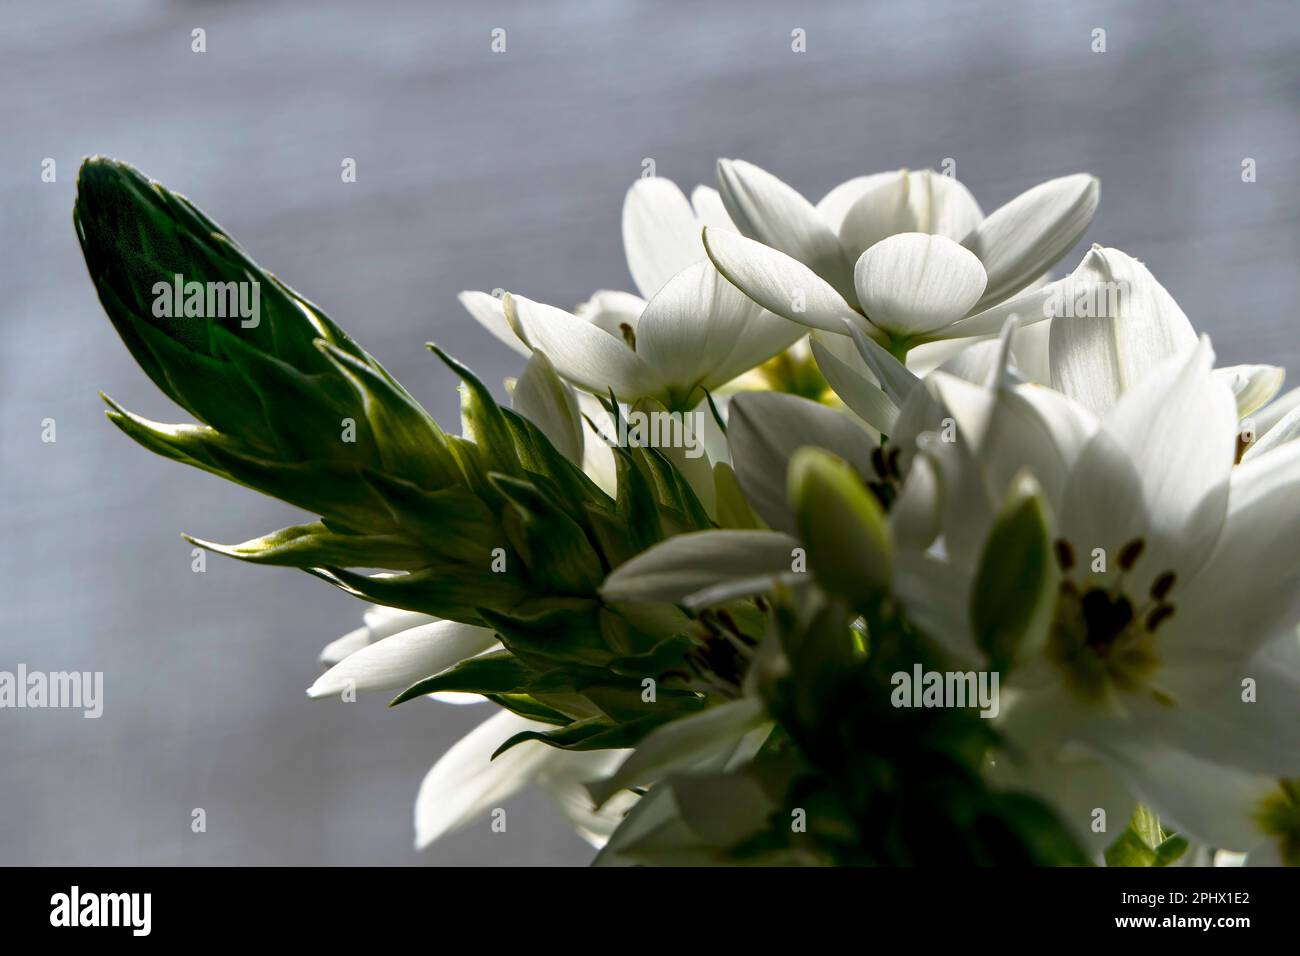 Delicate white Ornithogalum flowers close up on a blurred background Stock Photo